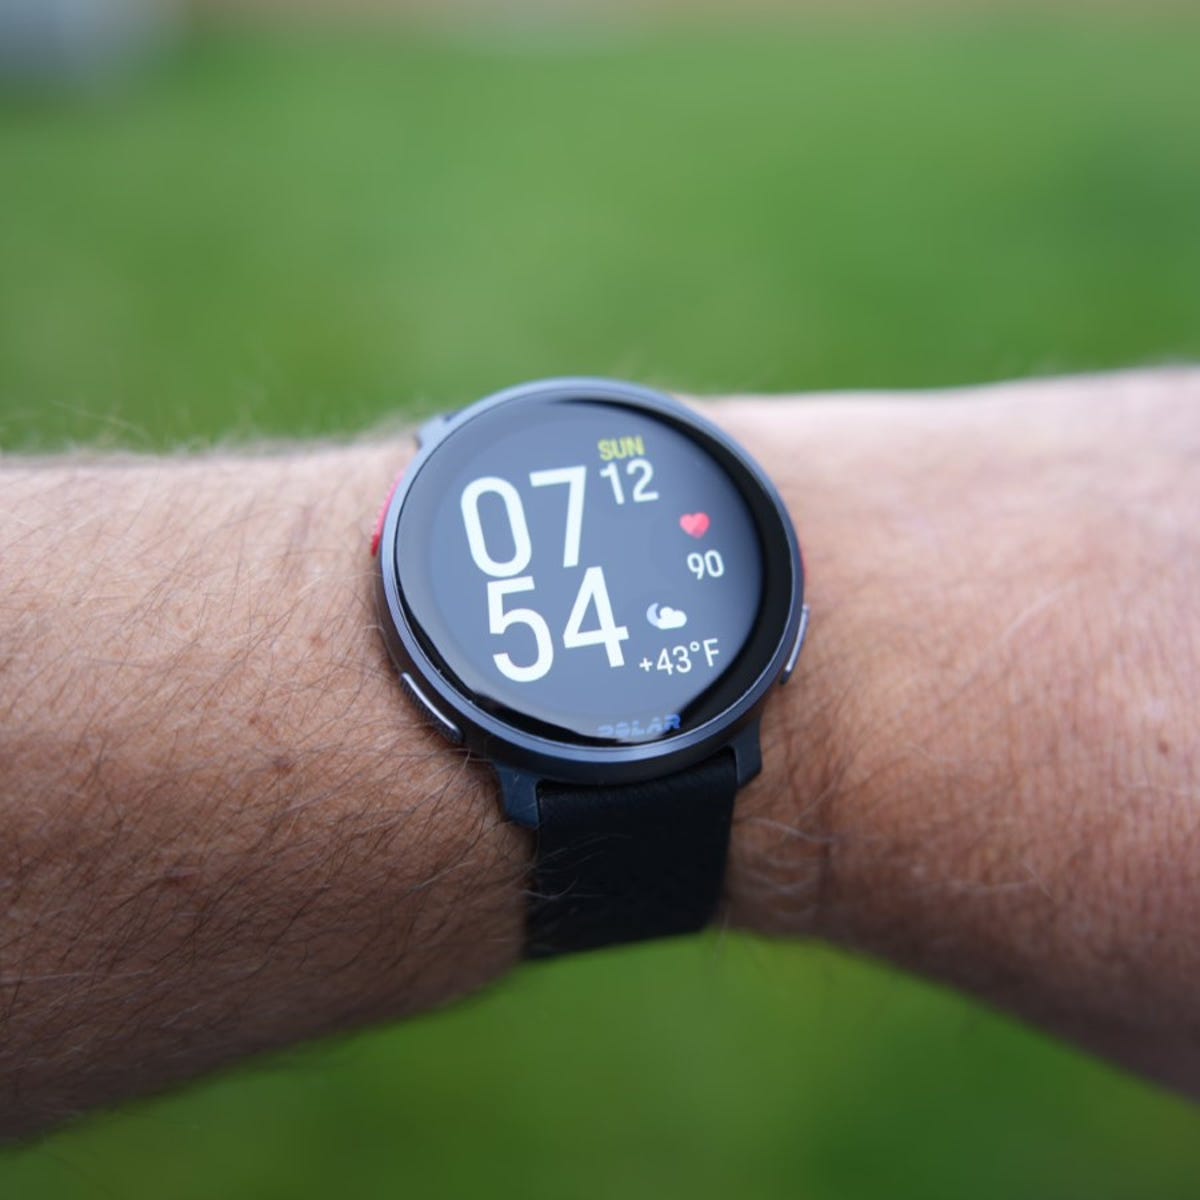 I found the most comprehensive GPS sports watch for fitness tracking, and  it's not made by Garmin